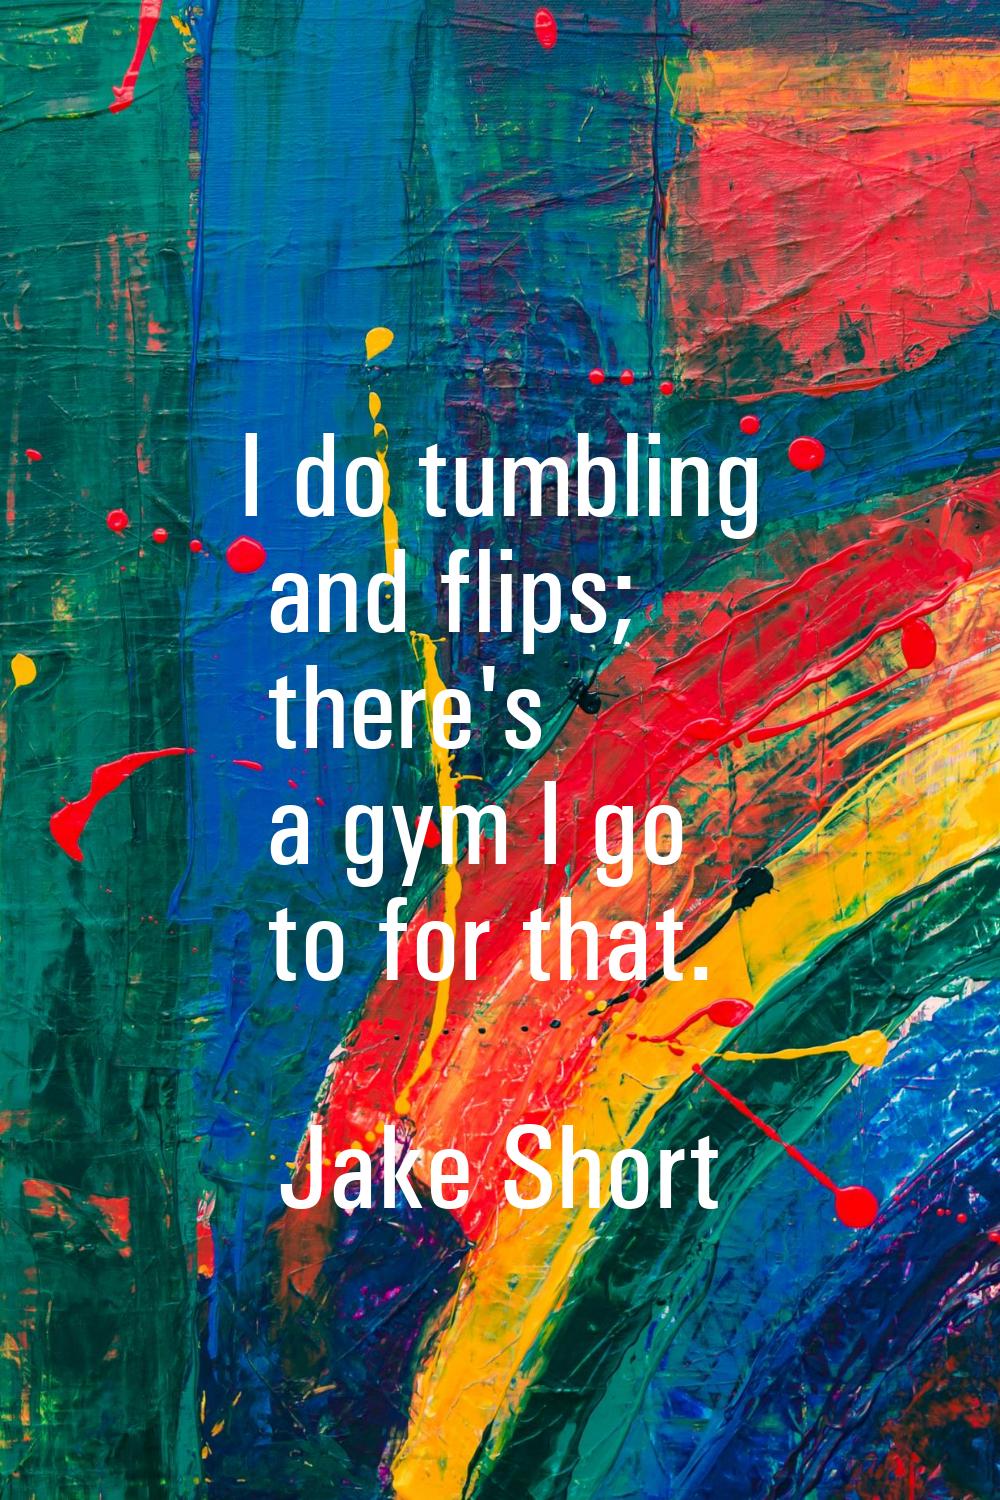 I do tumbling and flips; there's a gym I go to for that.